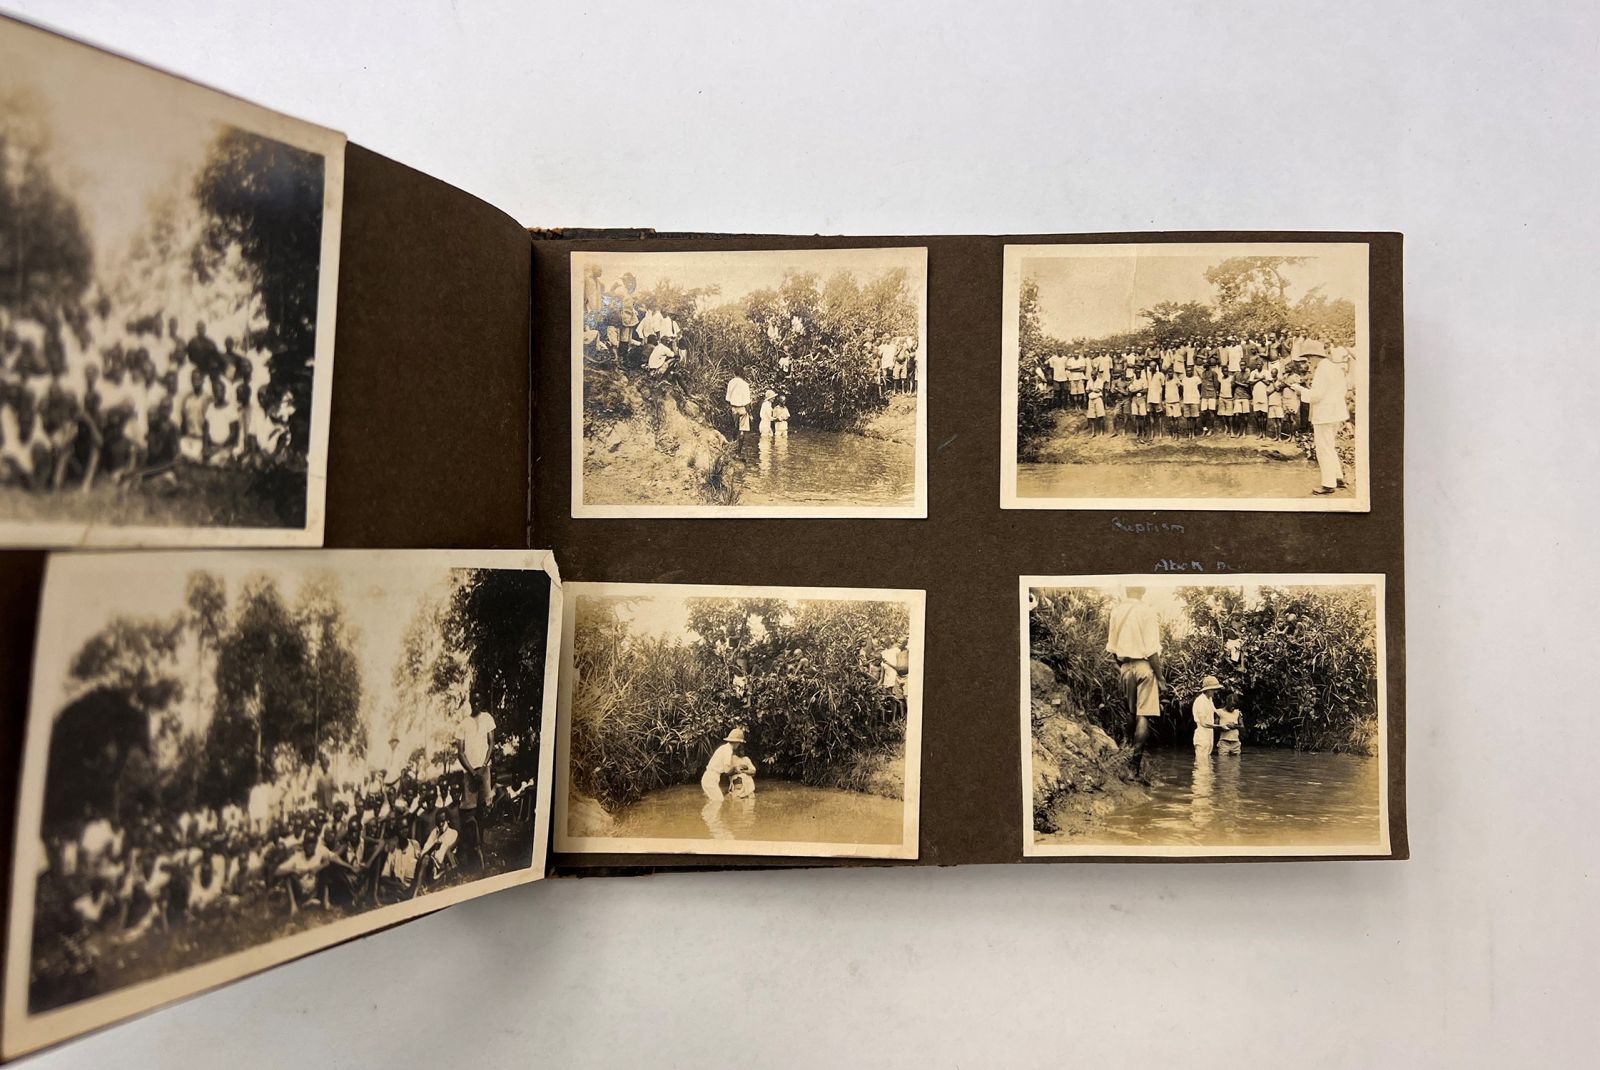 PHOTOGRAPH ALBUM OF A MISSIONARY FAMILY IN SOUTH SUDAN AND UGANDA -  image 1